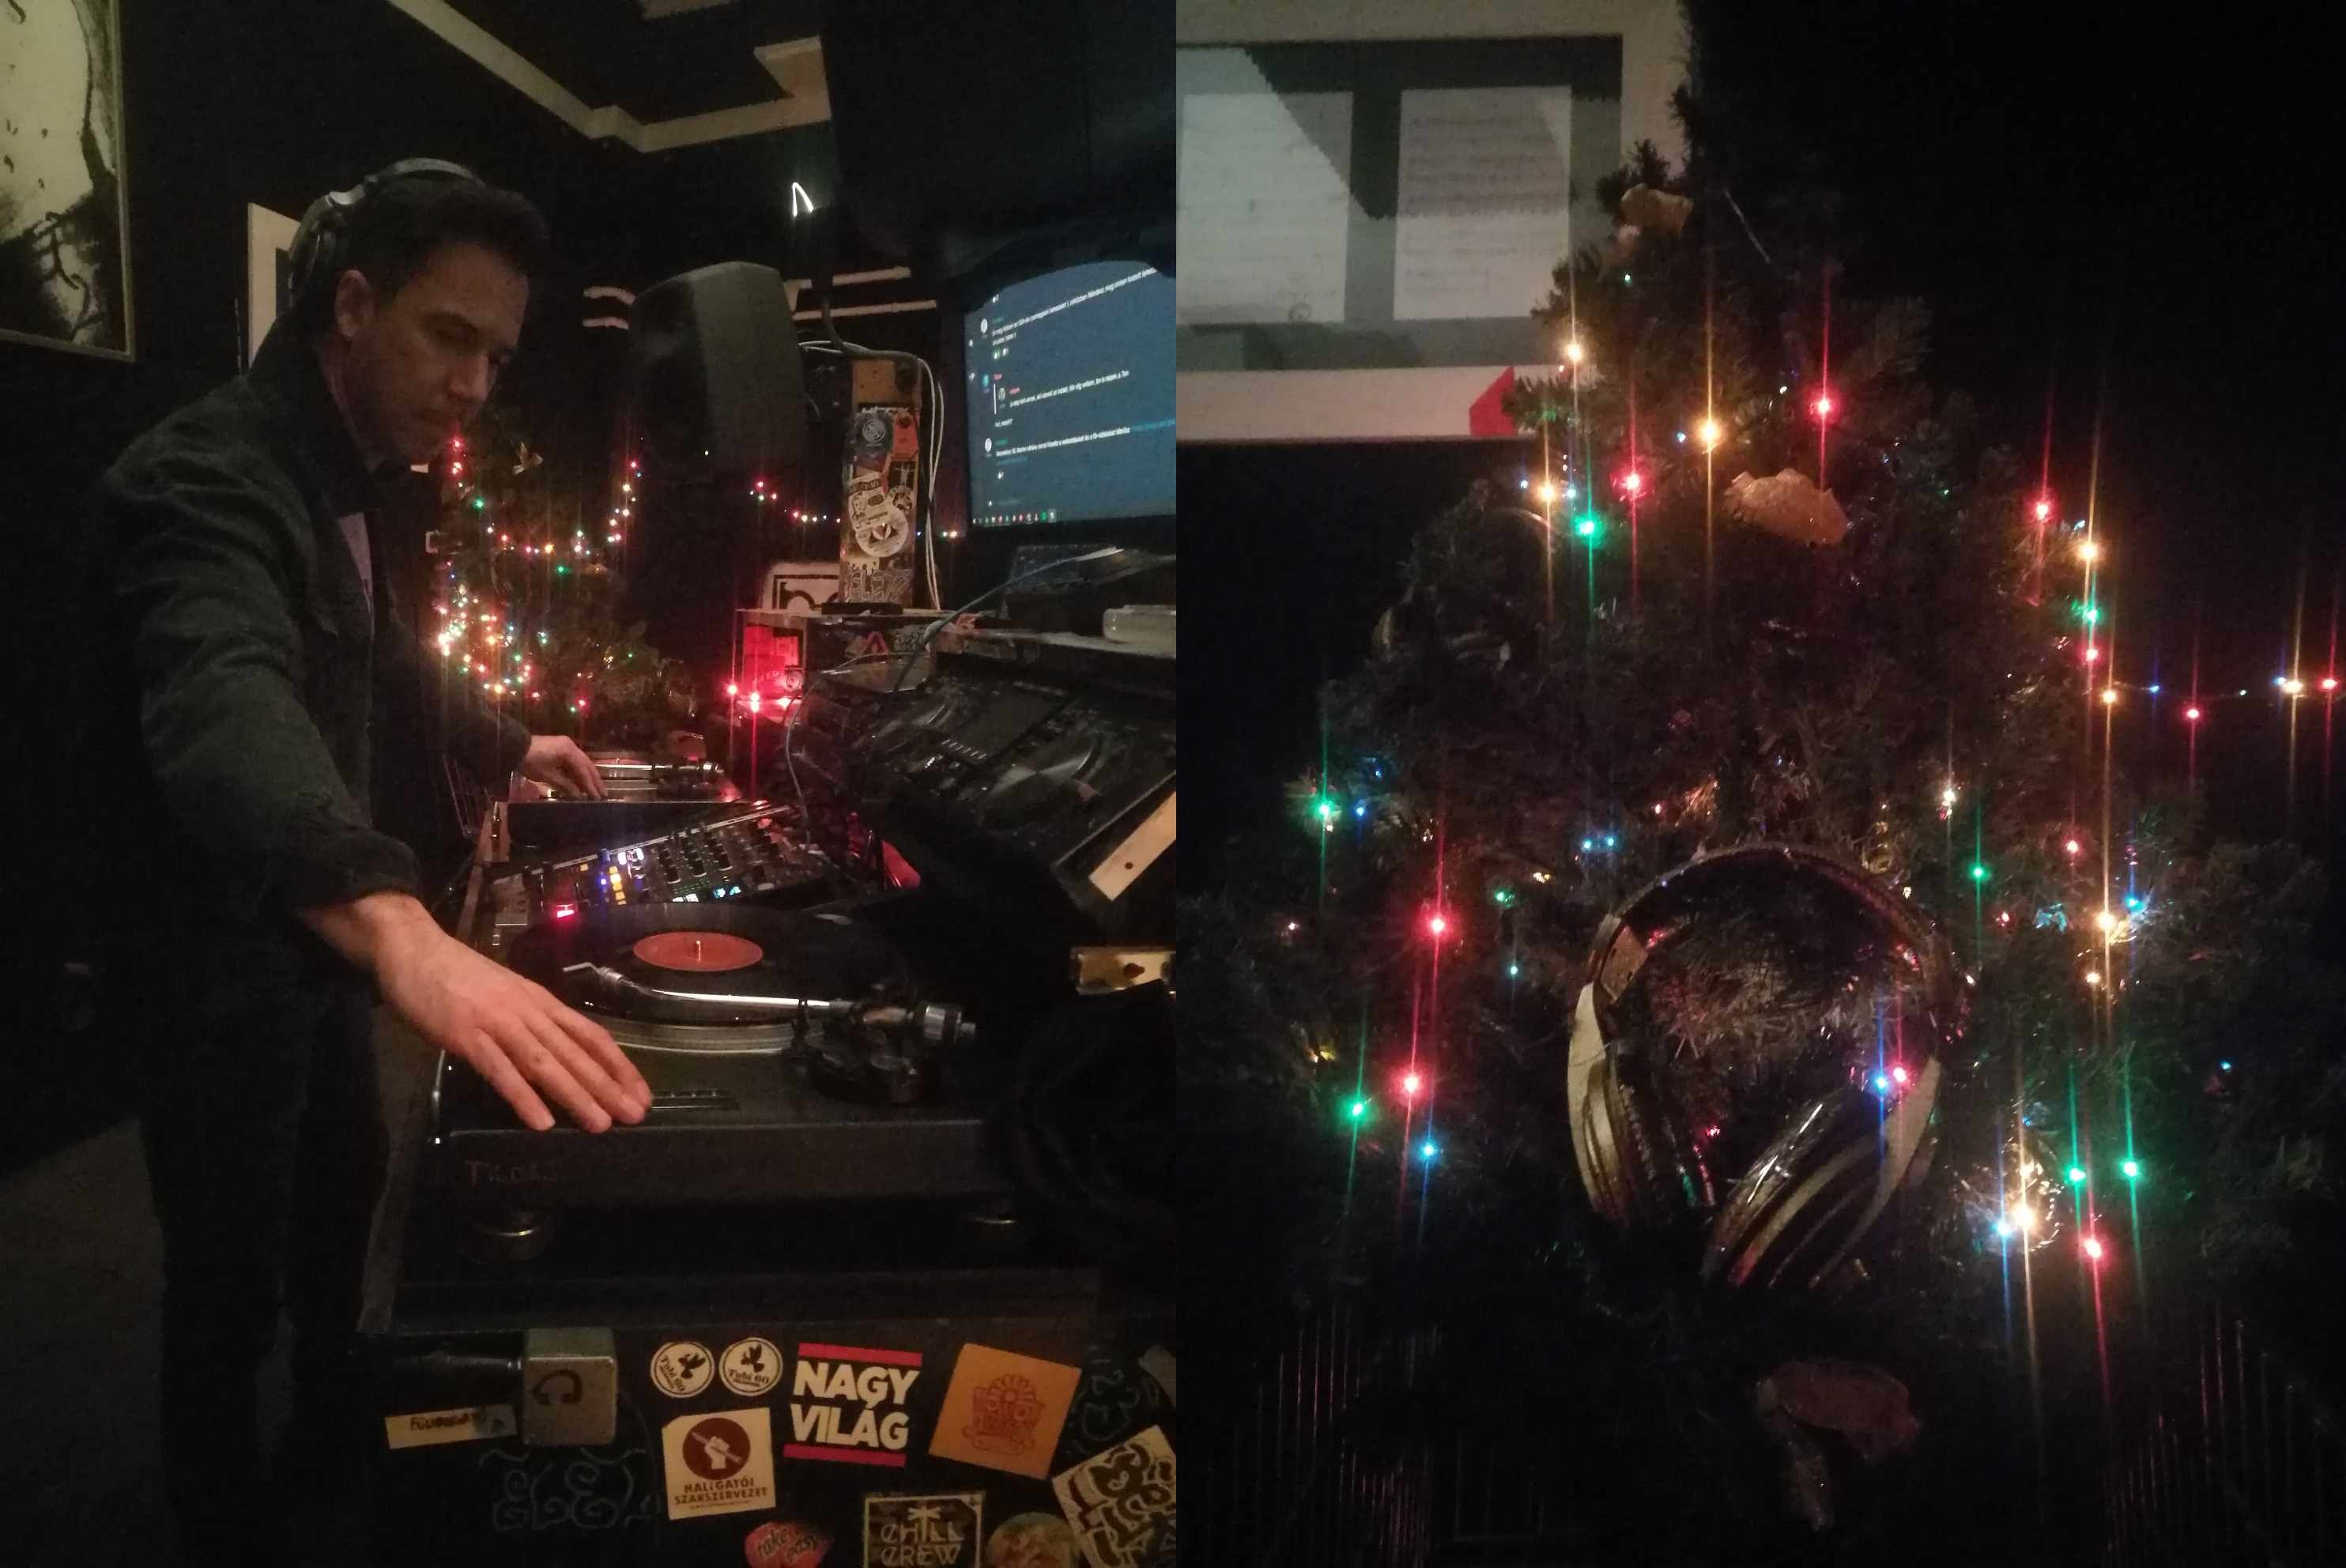 DJ Nándesz in BBD at XMAS time